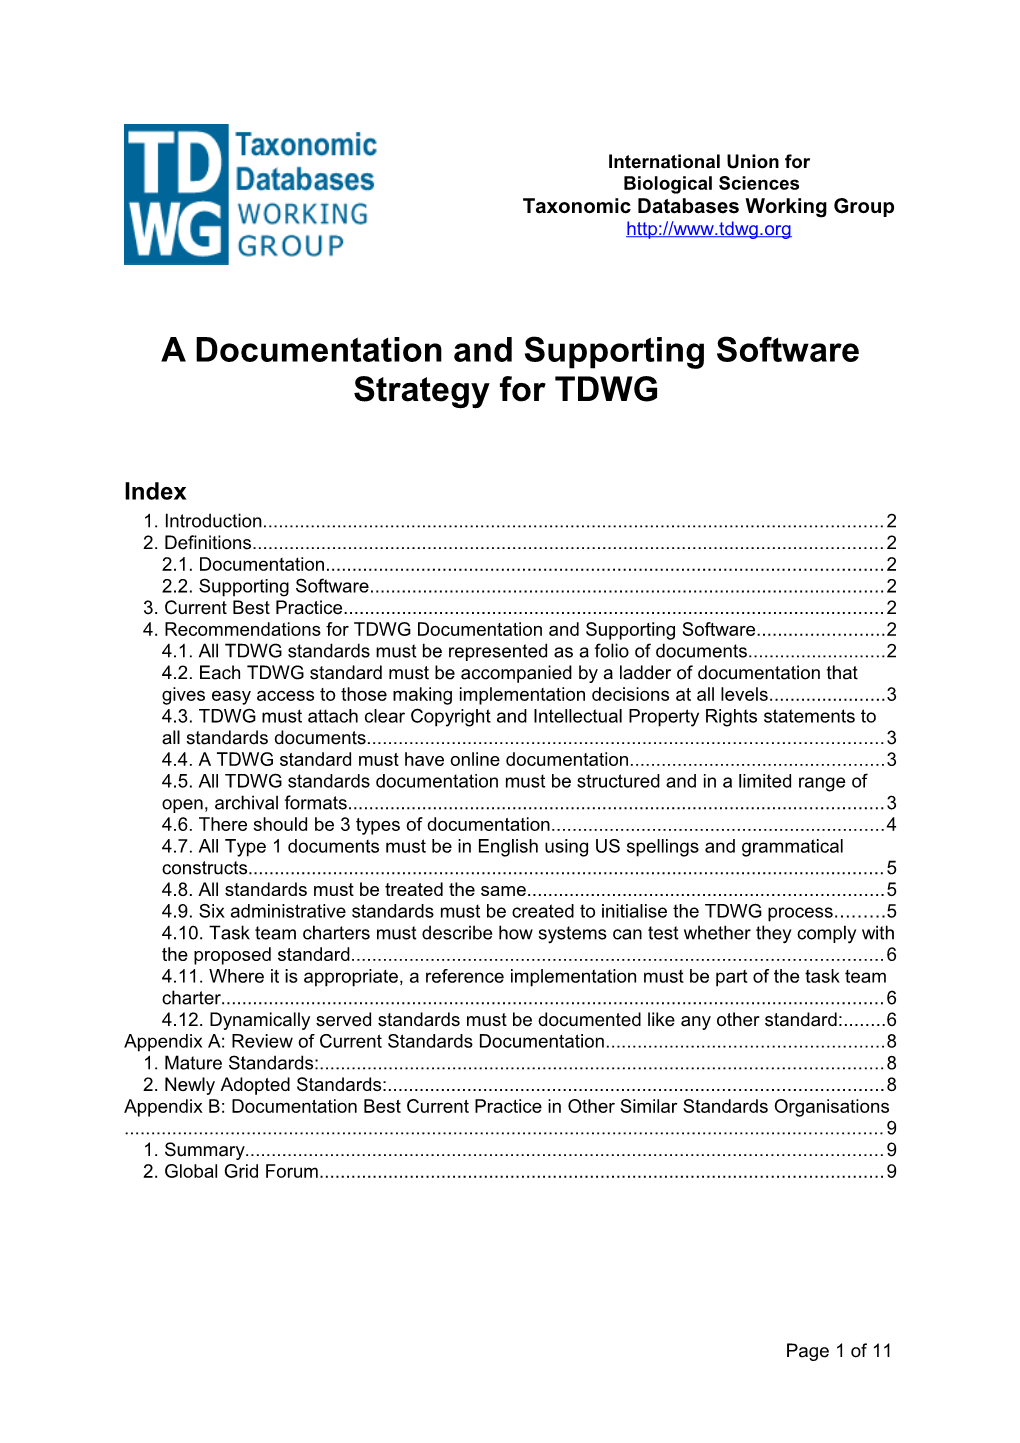 A Documentation and Supporting Software Strategy for TDWG